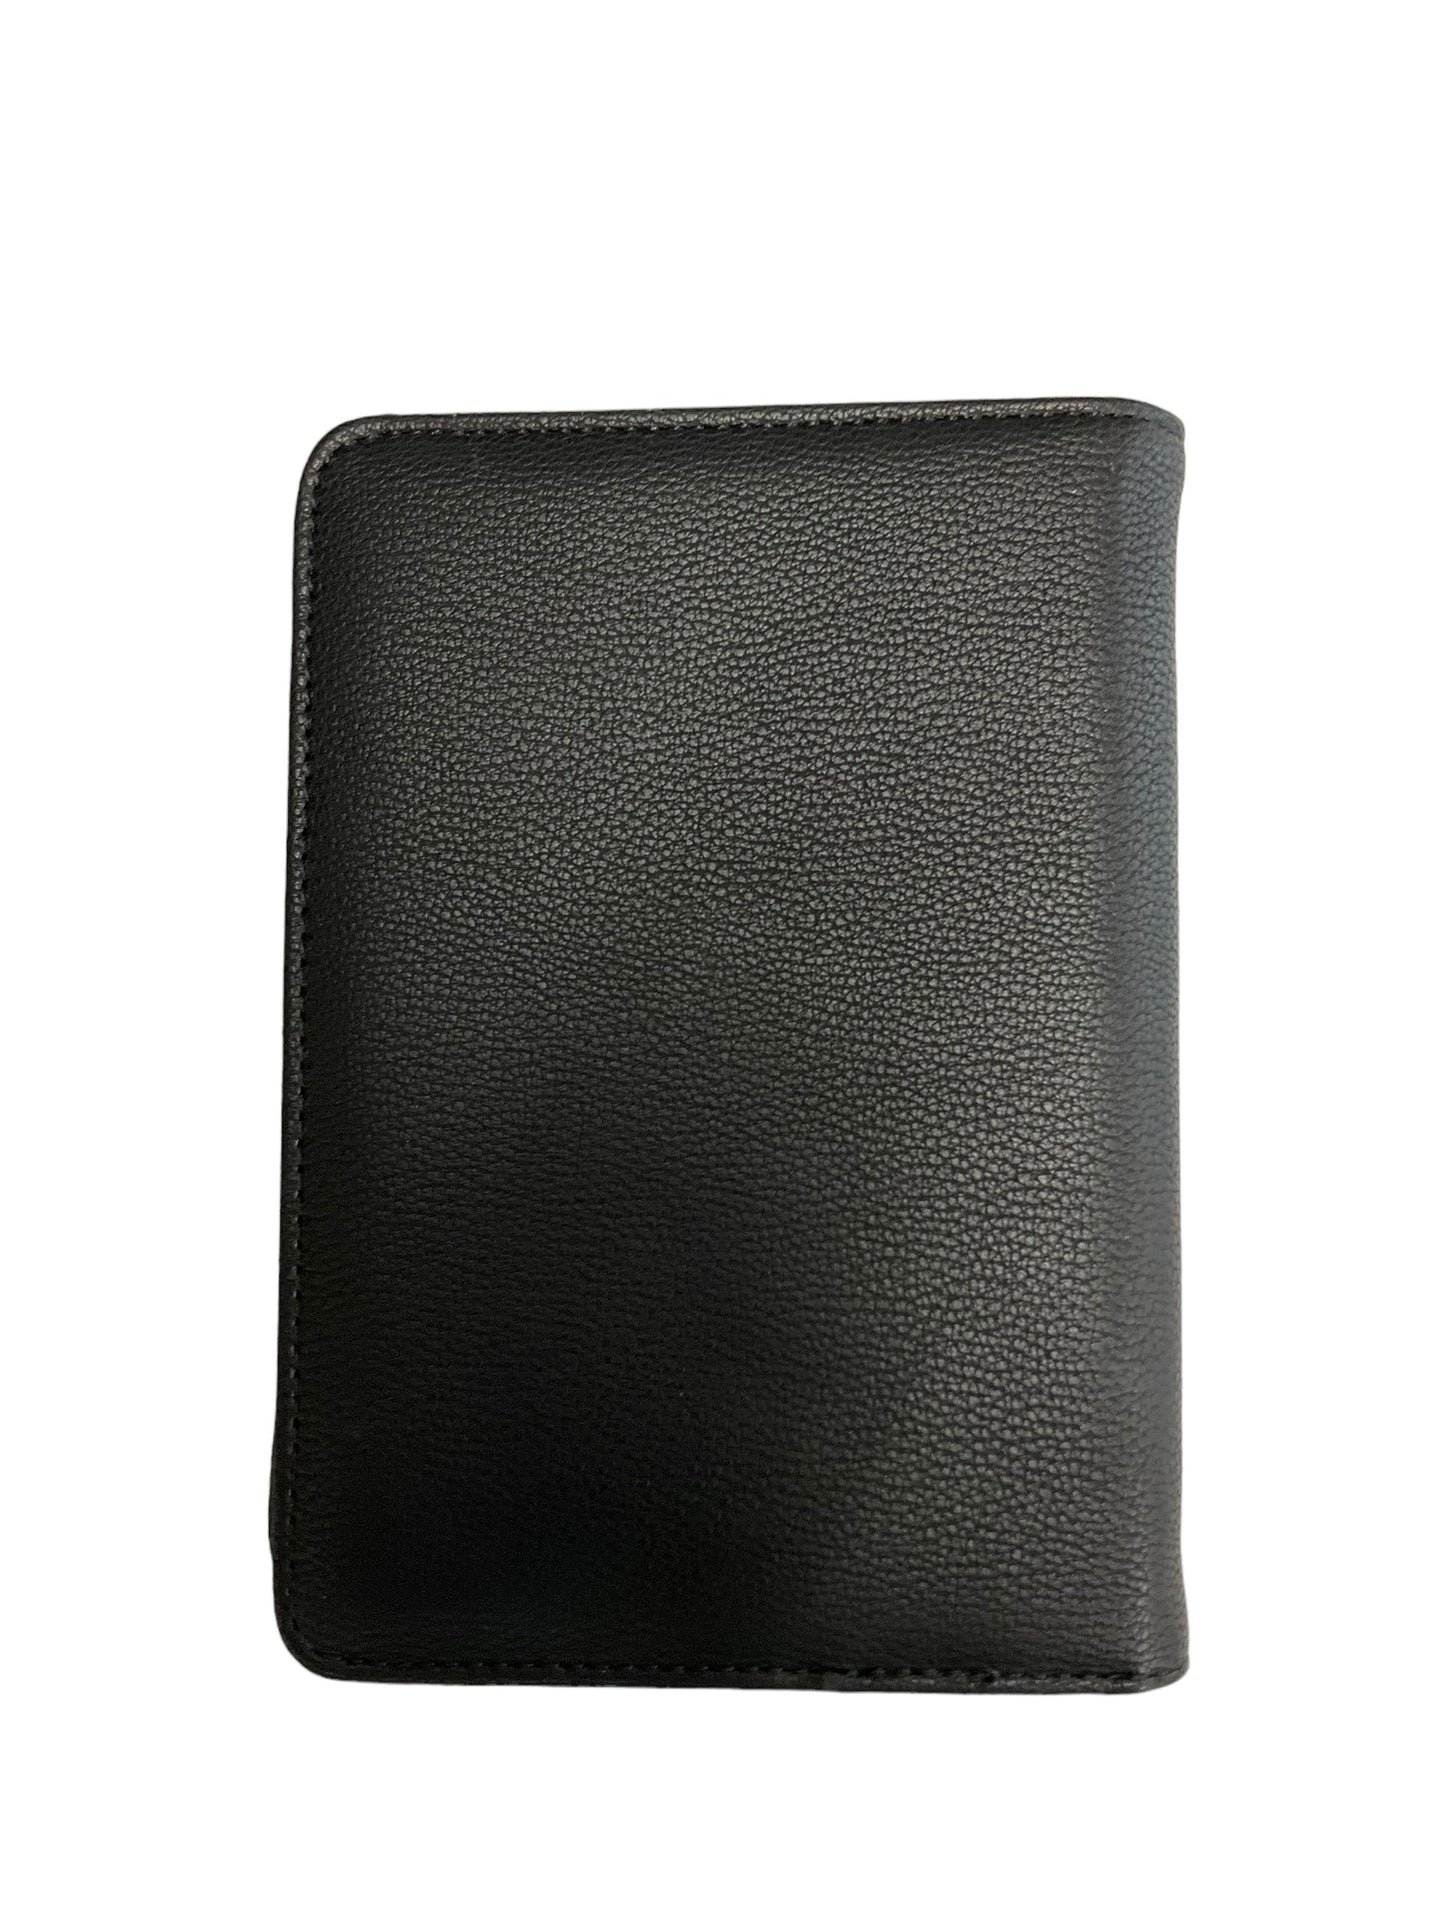 Wallet Guess, Size Small